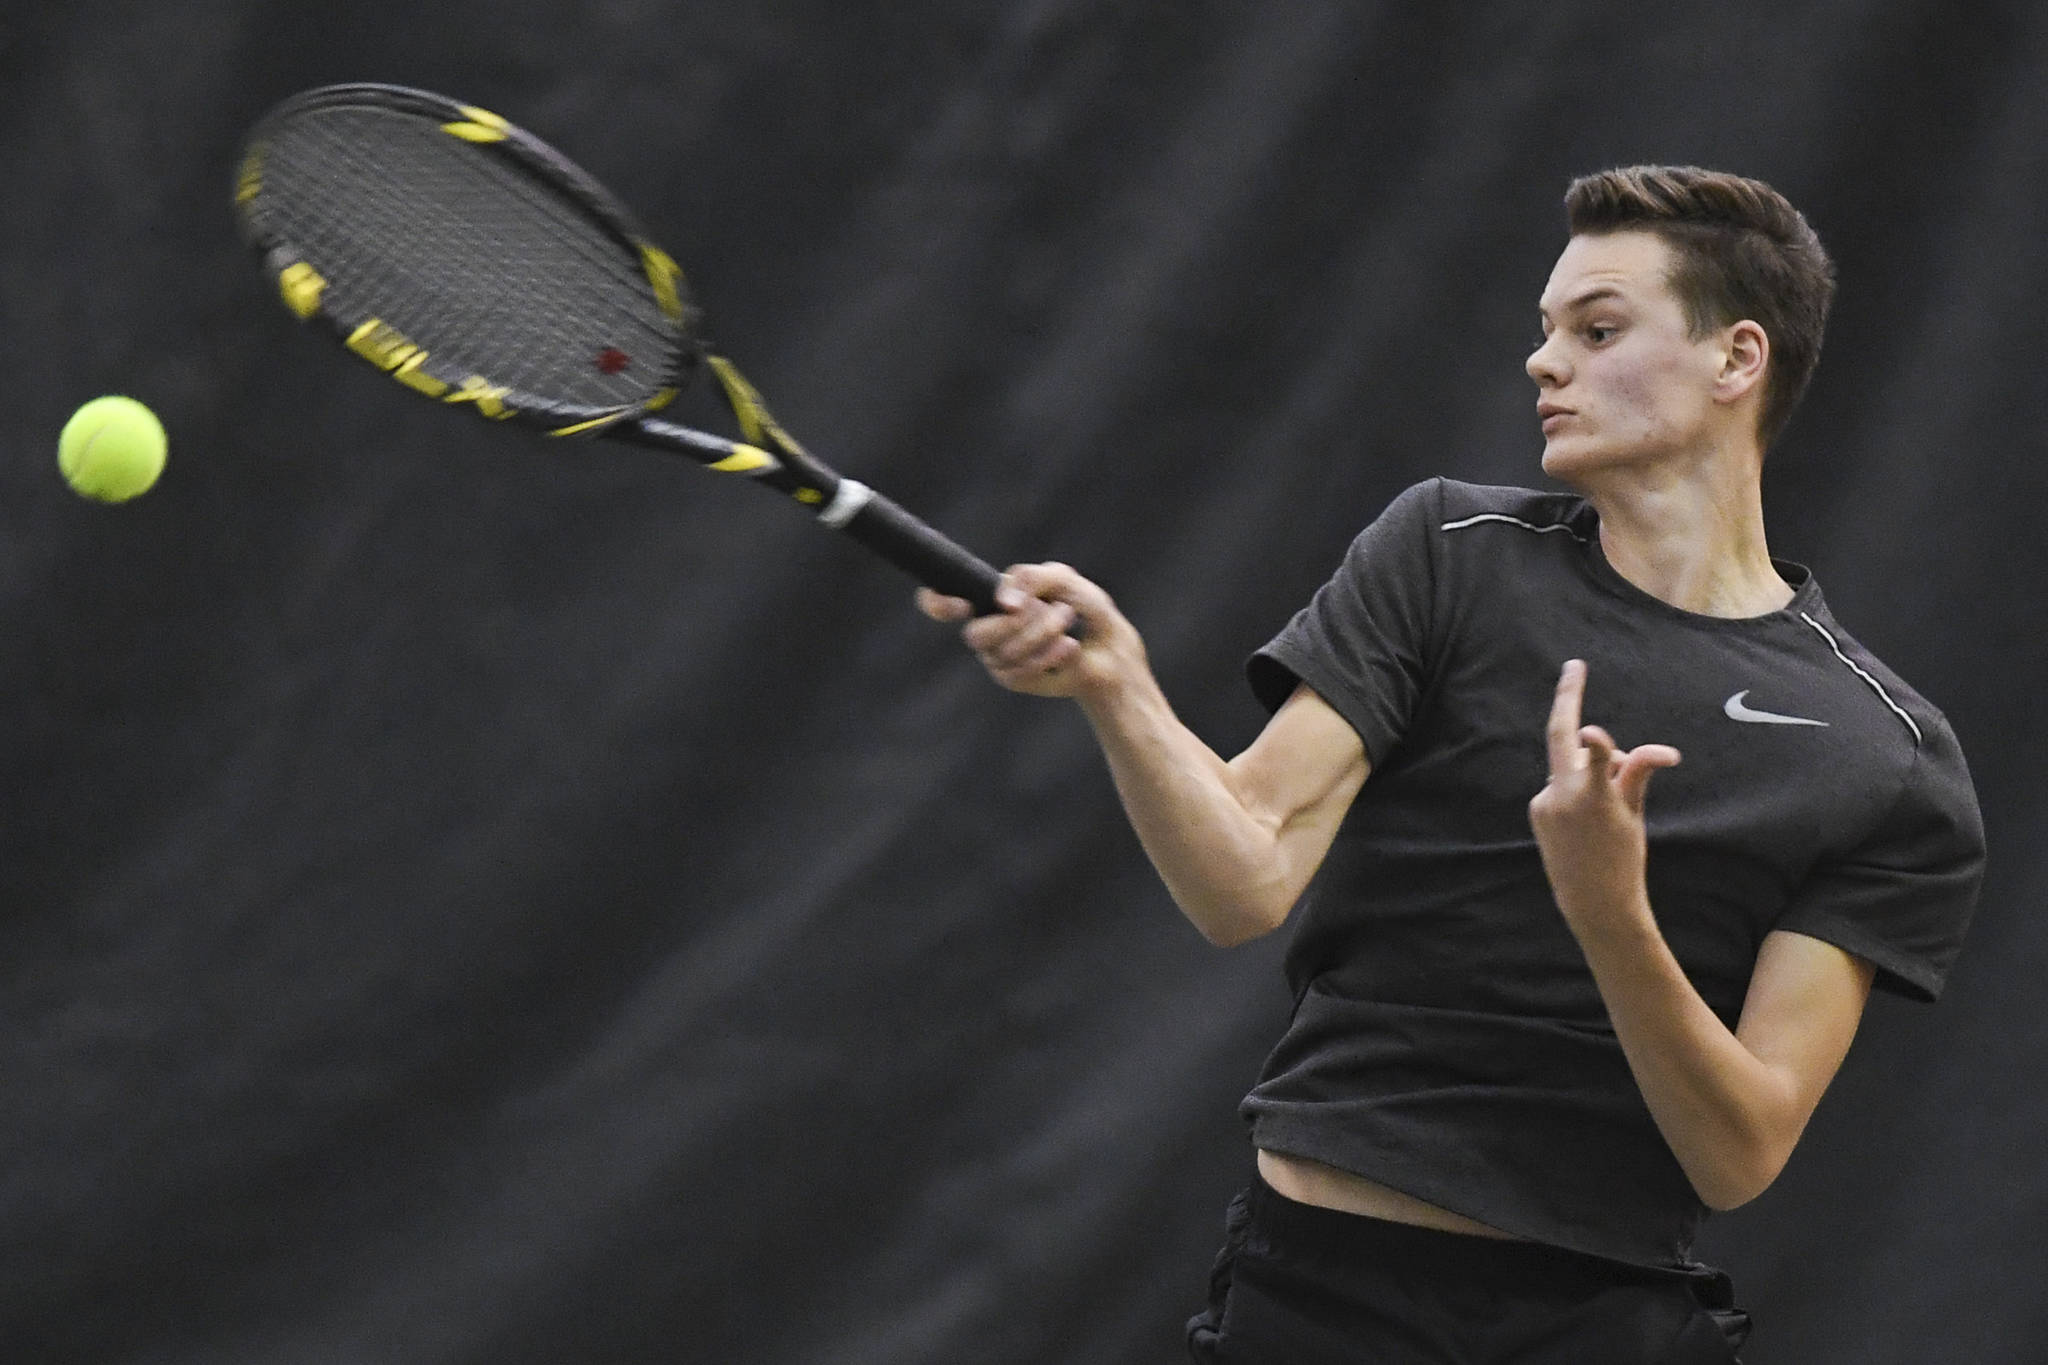 Kevin Kooistra returns a forehand as he plays doubles with partner Alain Soltys-Gray as they play against Liam Penn and Callan Smith at the Region V Tennis Tournament at the Alaska Club/JRC on Wednesday, Sept. 25, 2019. Penn and Smith won the match 6-2, 6-1, and played Will Rehfeldt and William Smoker in the final on Saturday. (Michael Penn | Juneau Empire)